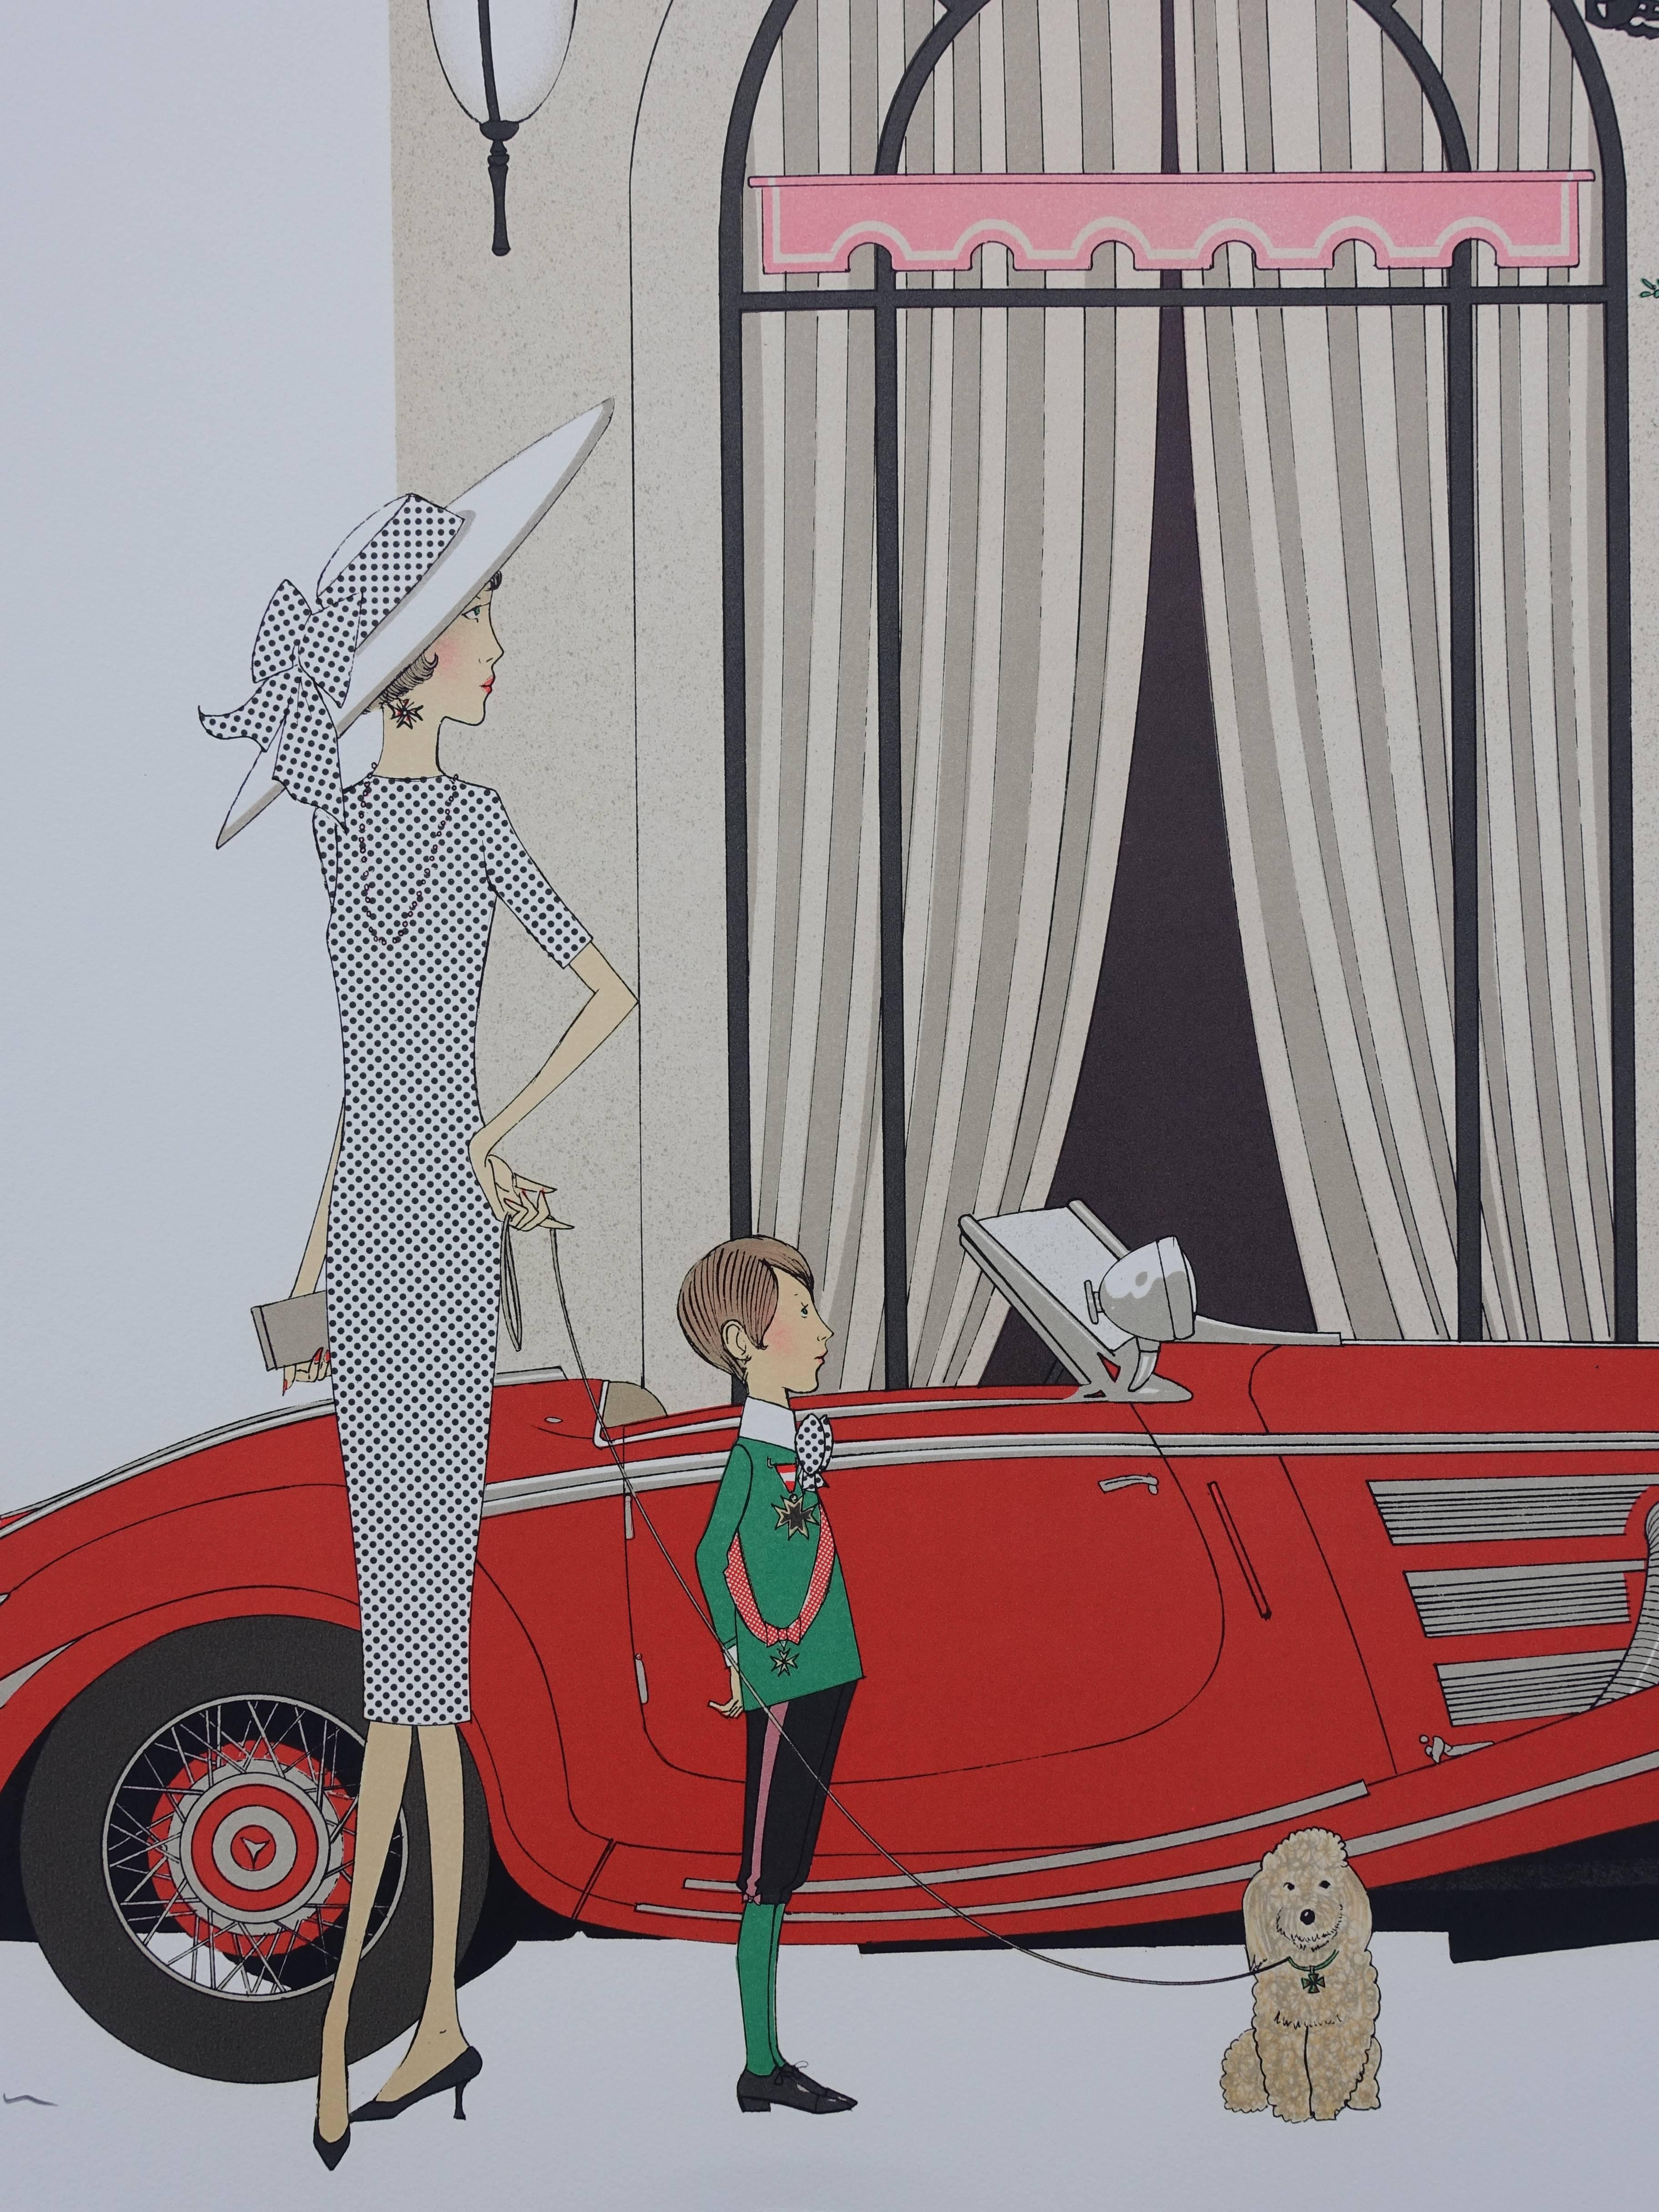 Hotel : Mercedes Roadster 540K & Plaza Athenee - Signed lithograph - Gray Figurative Print by Denis Paul Noyer